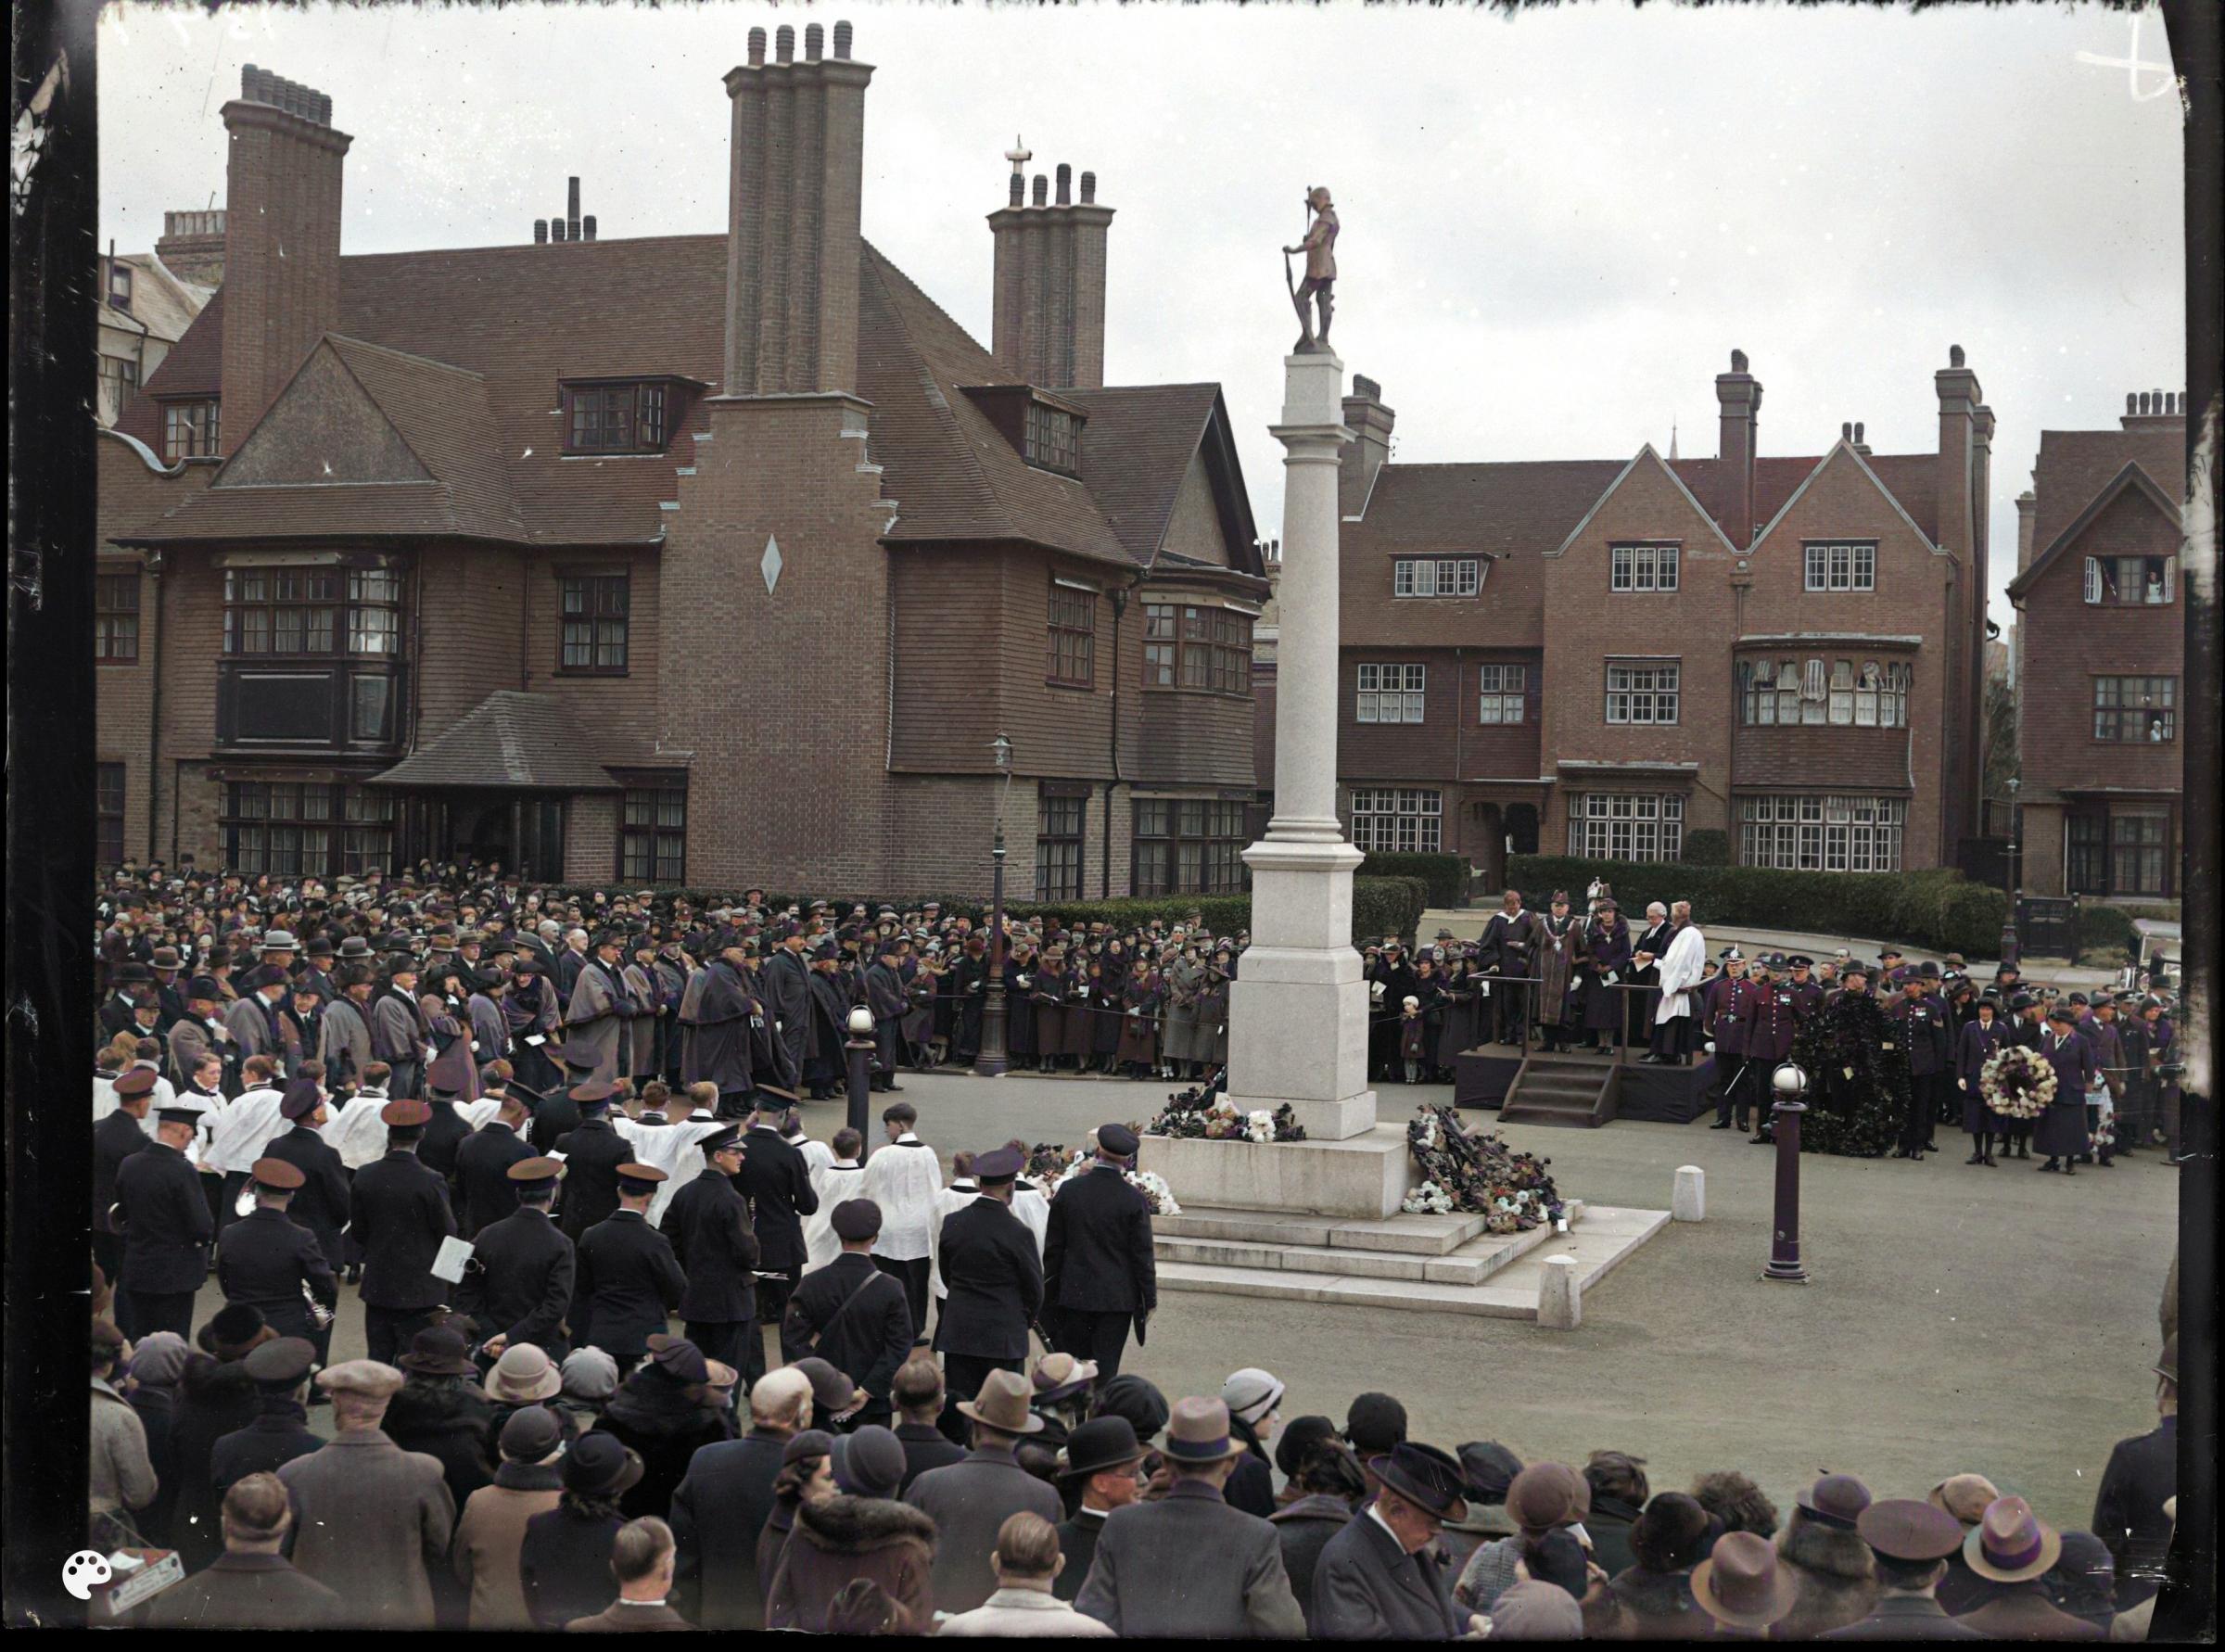 Crowds gather for Remembrance Day 1929 in Grand Avenue, Hove. Following the Great War, Remembrance Day was attended by thousands 